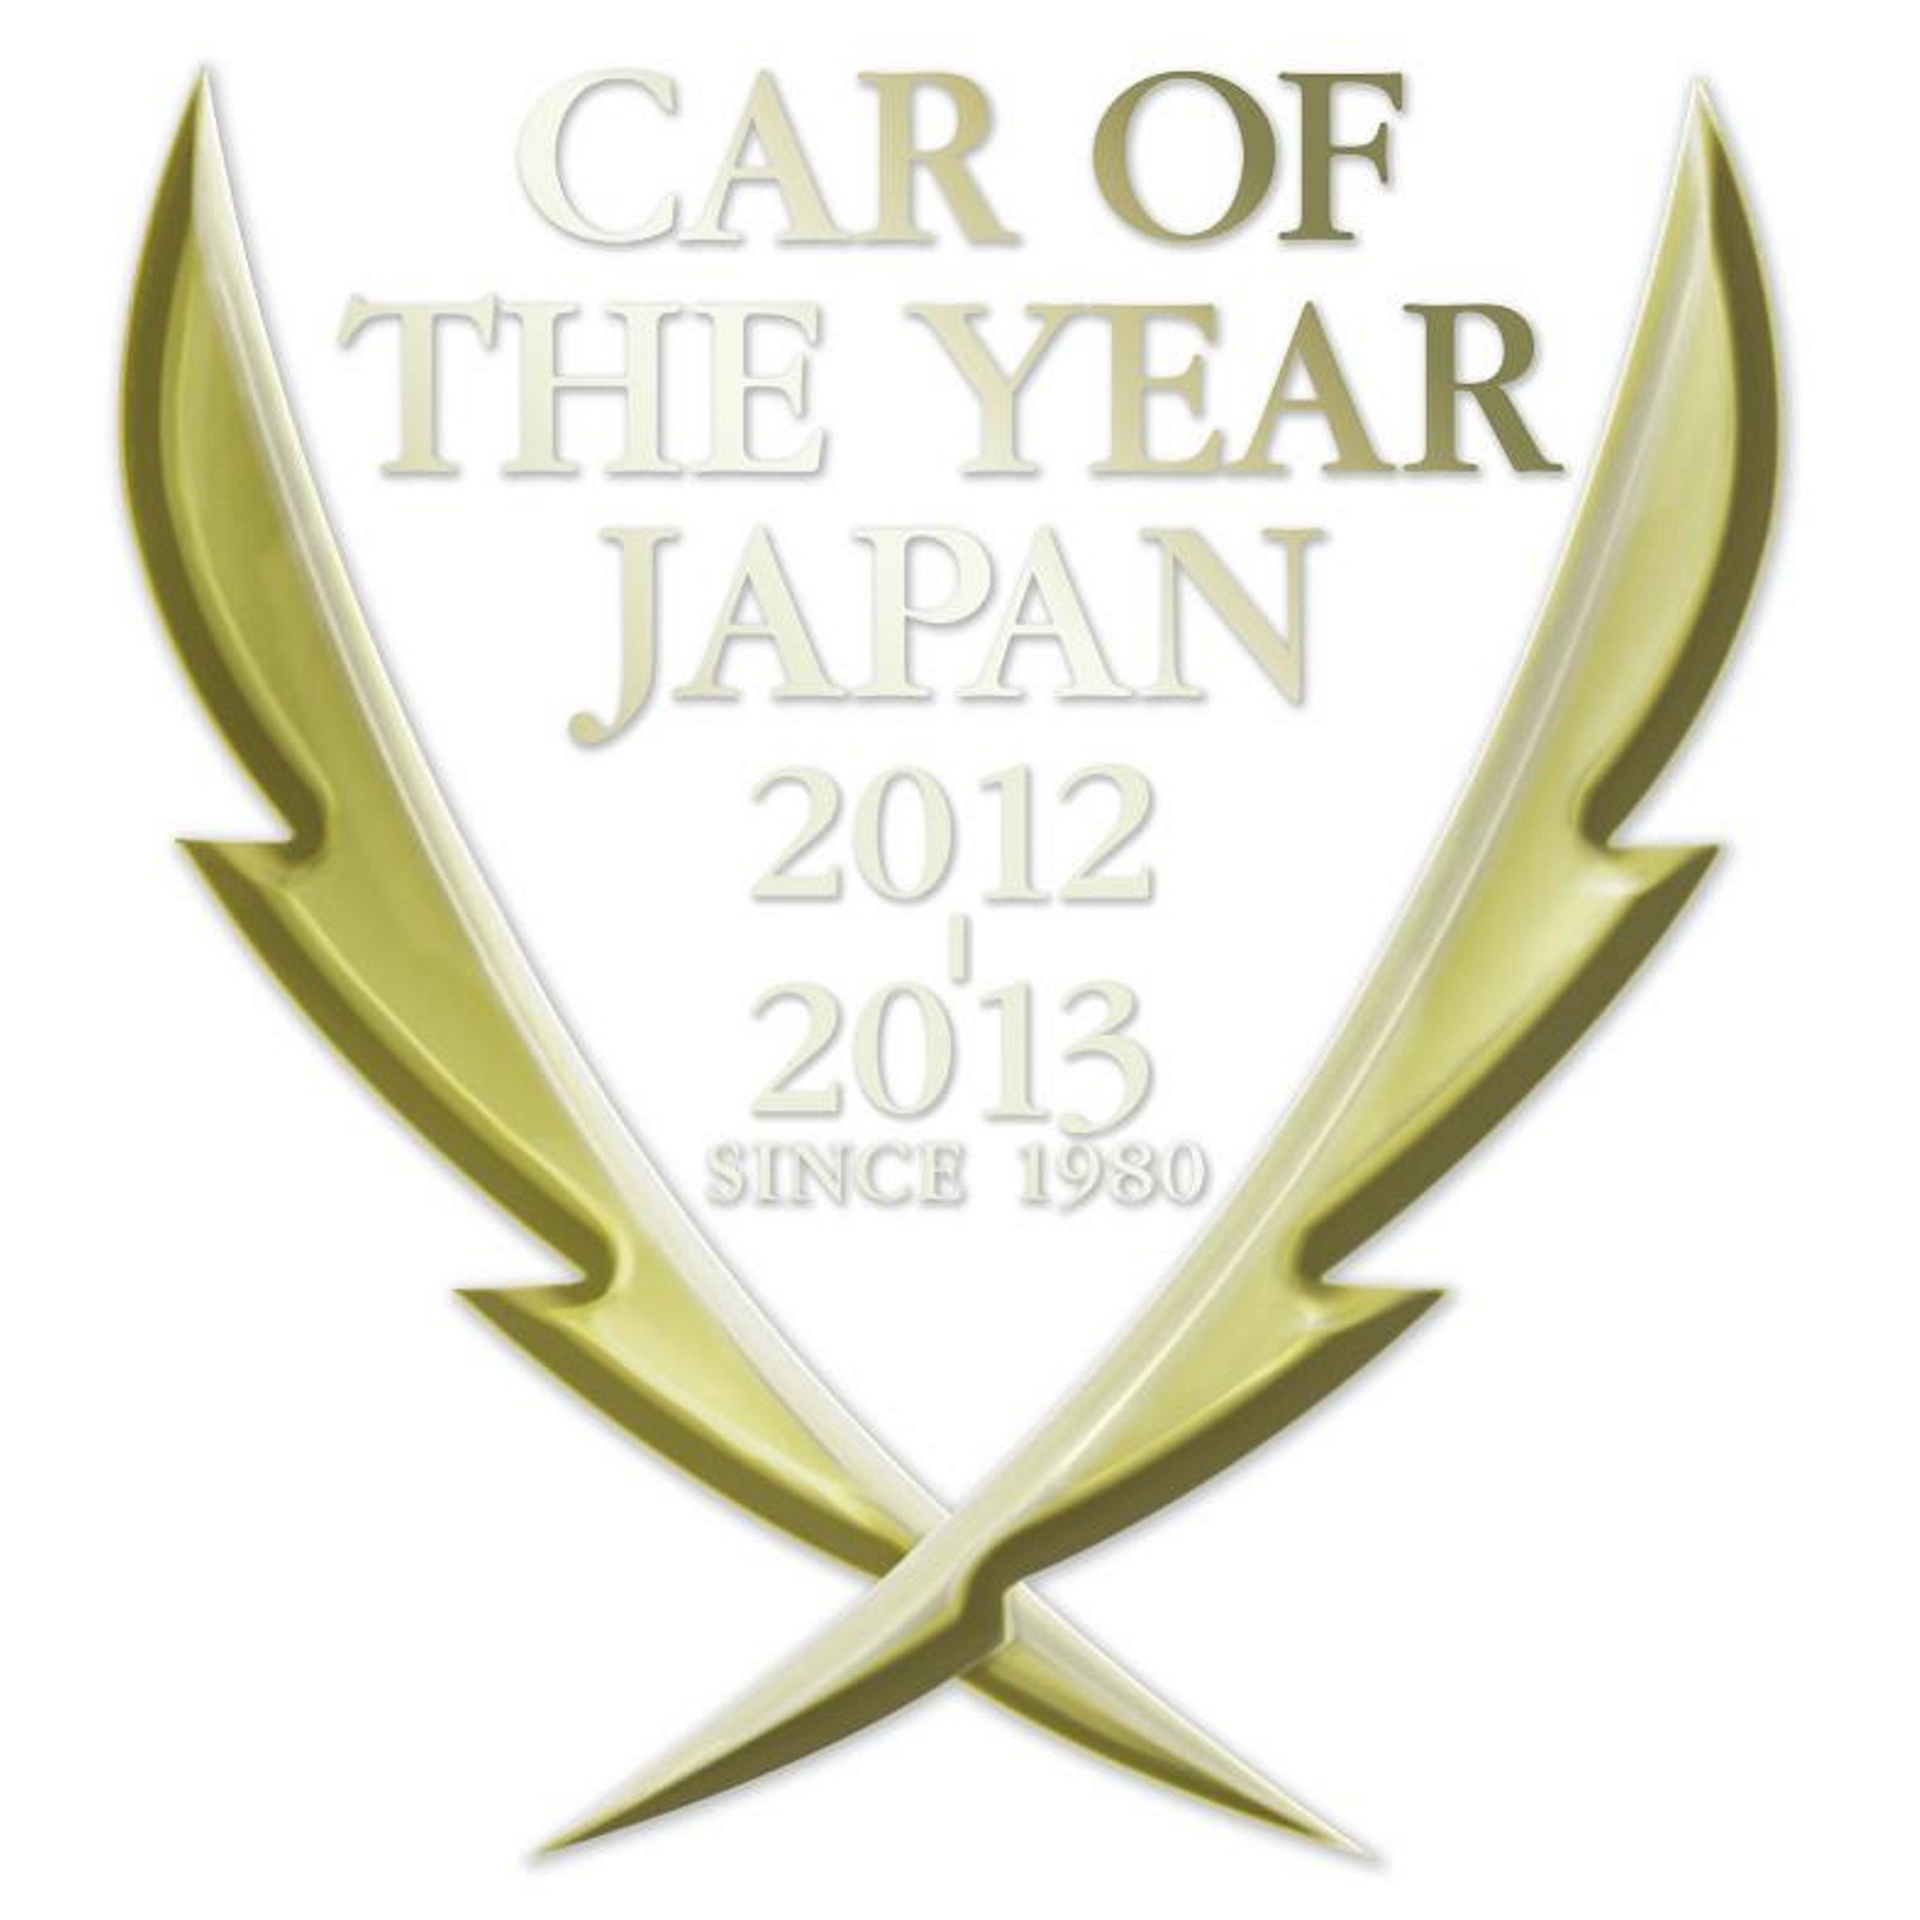 Car of the Year Japan 2012-2013